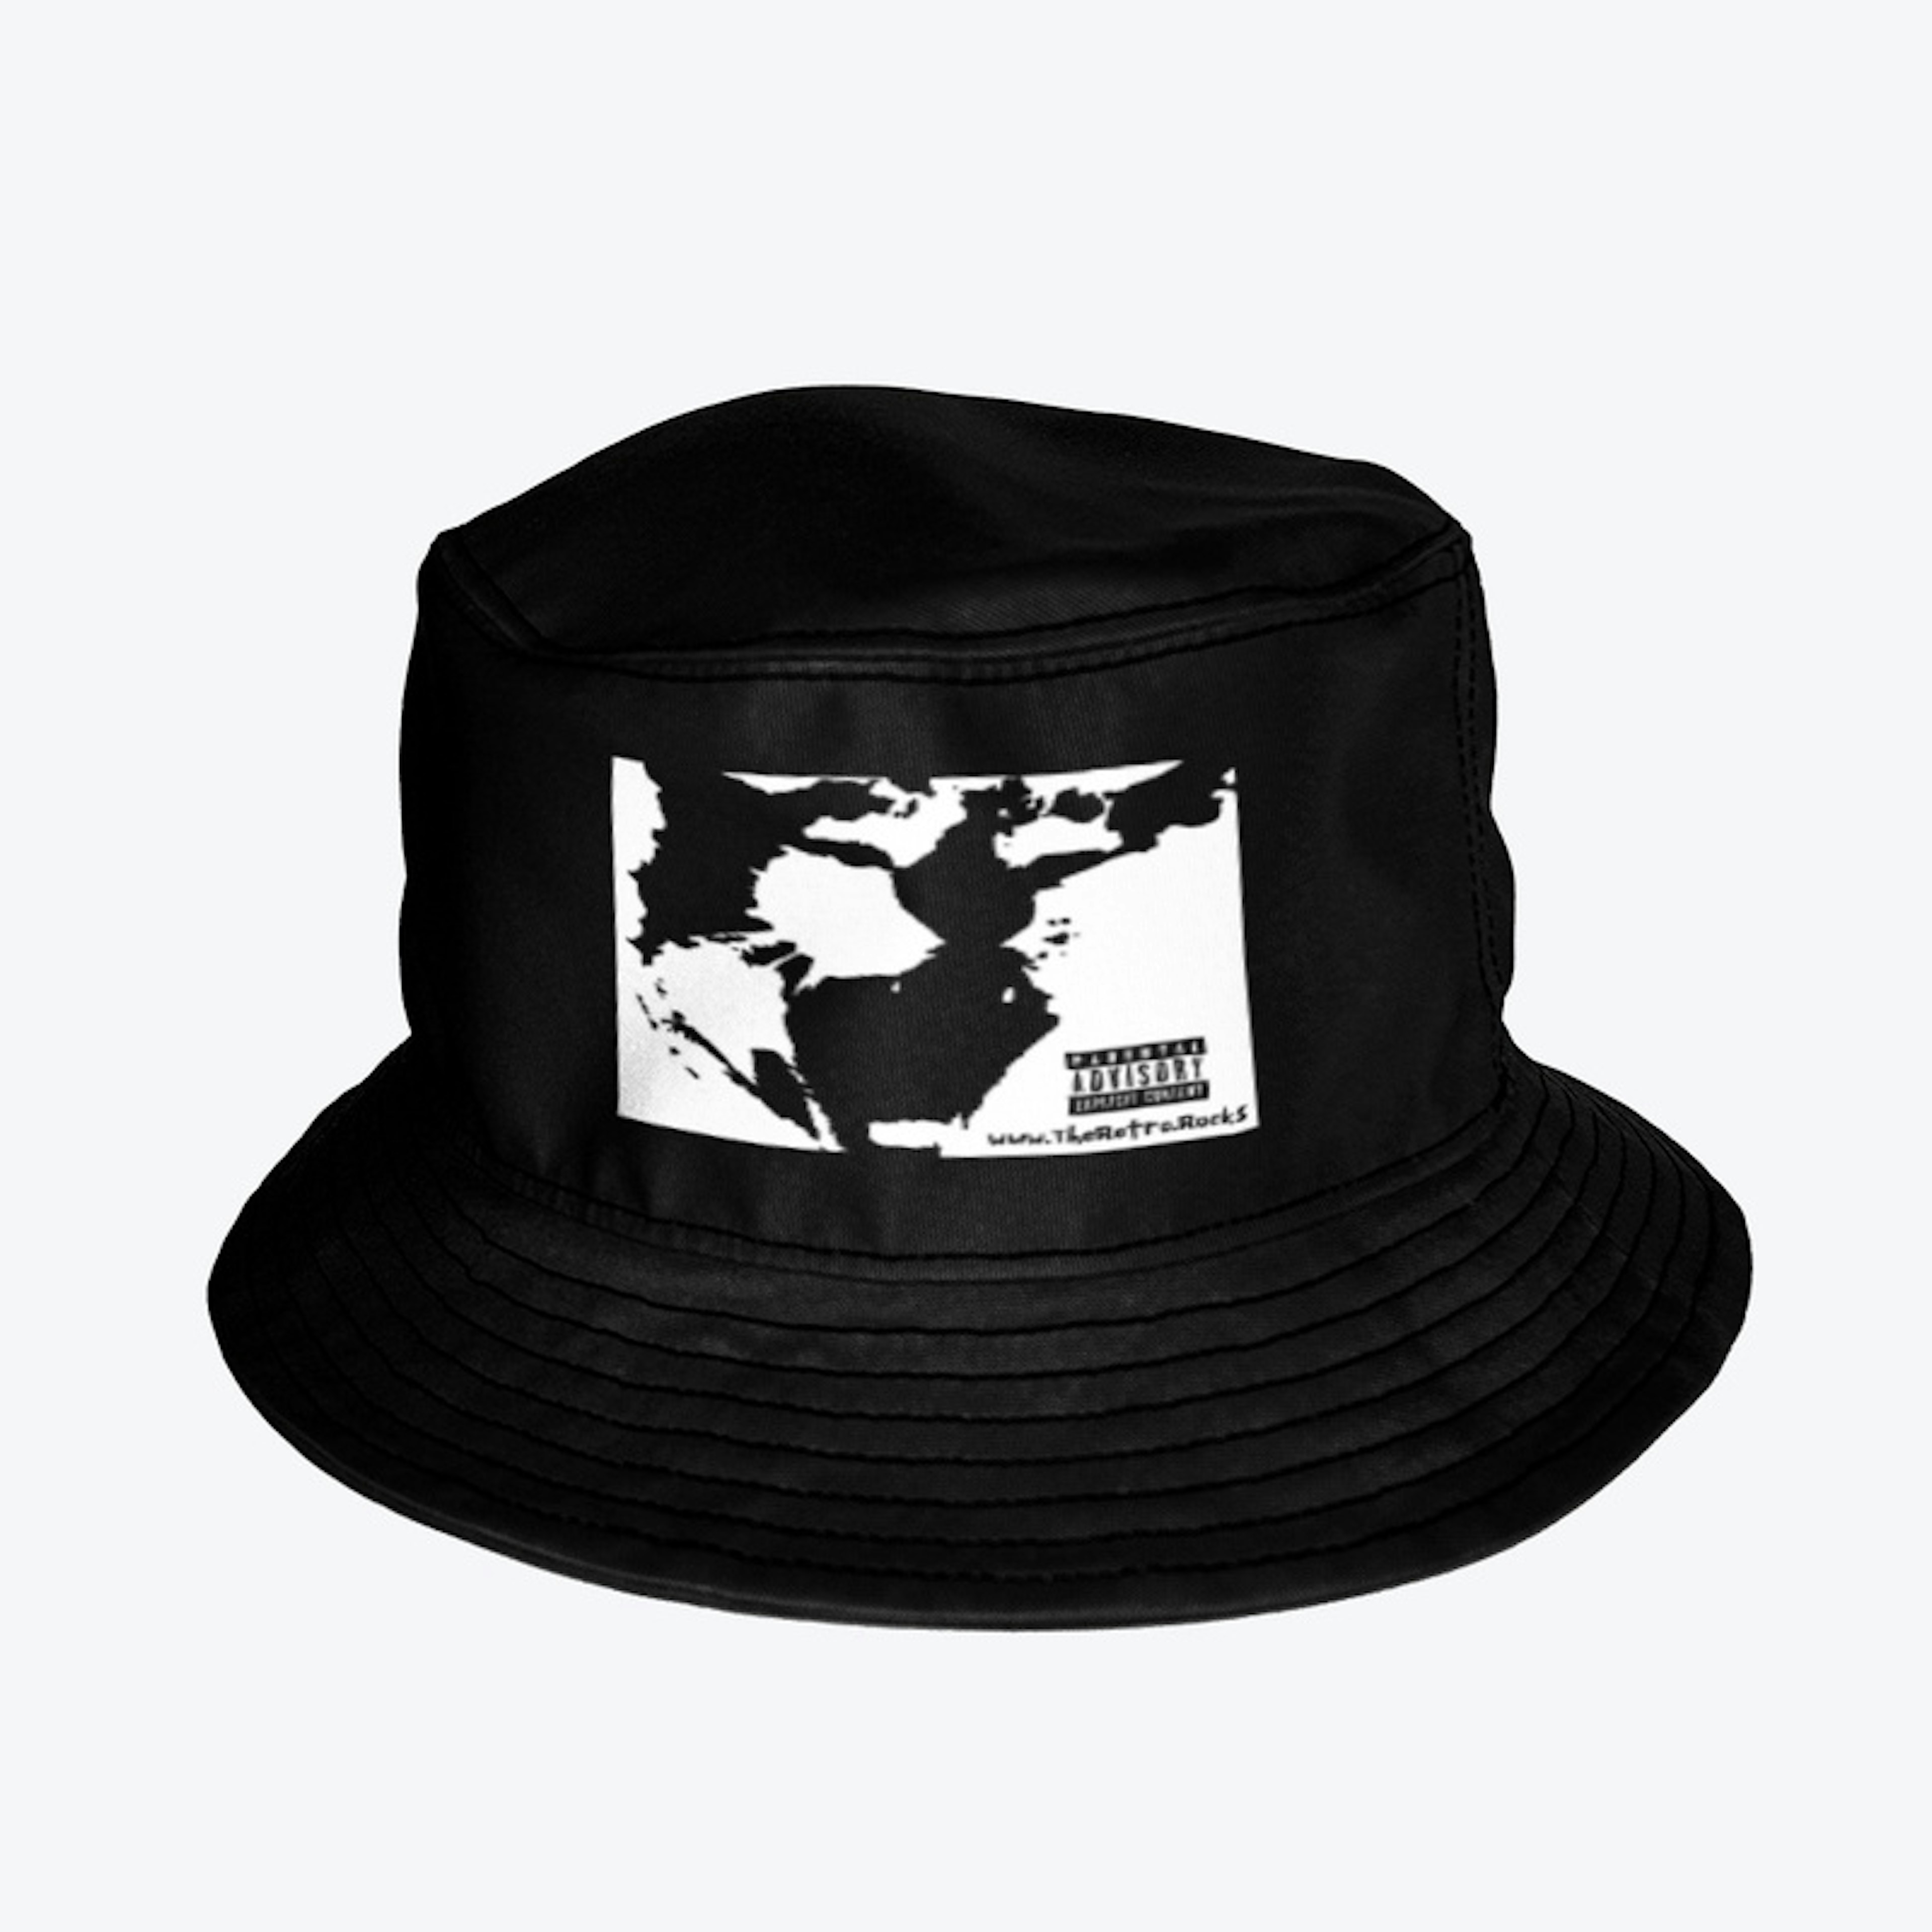 The Retro "Concert Collection" Hat